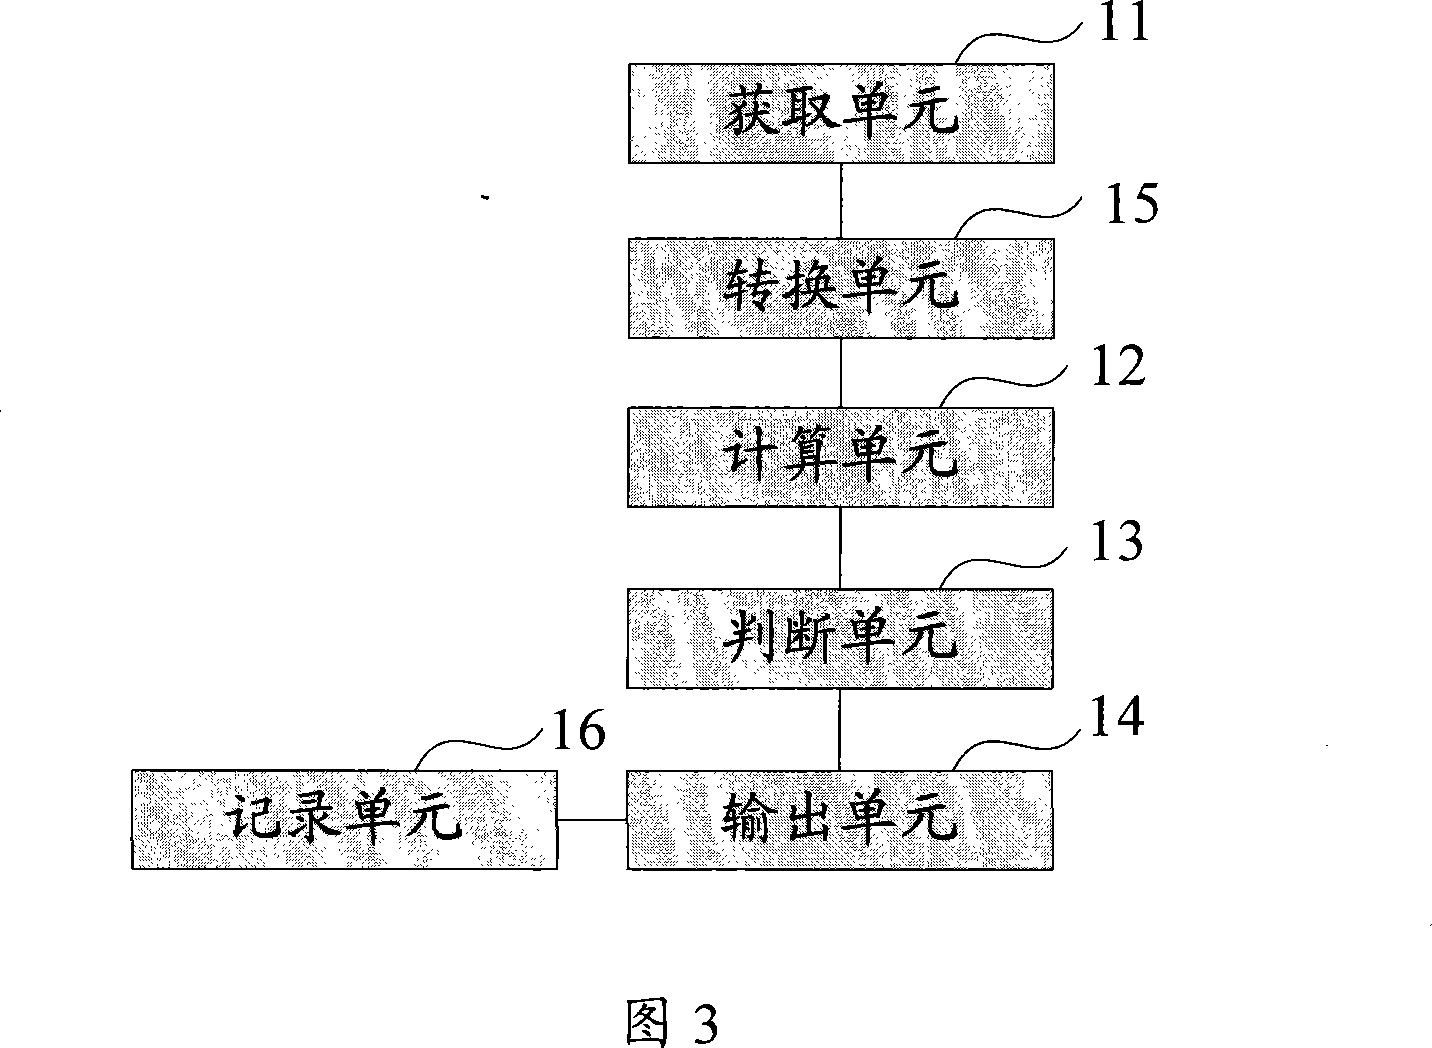 Method and system for intercomparison of route